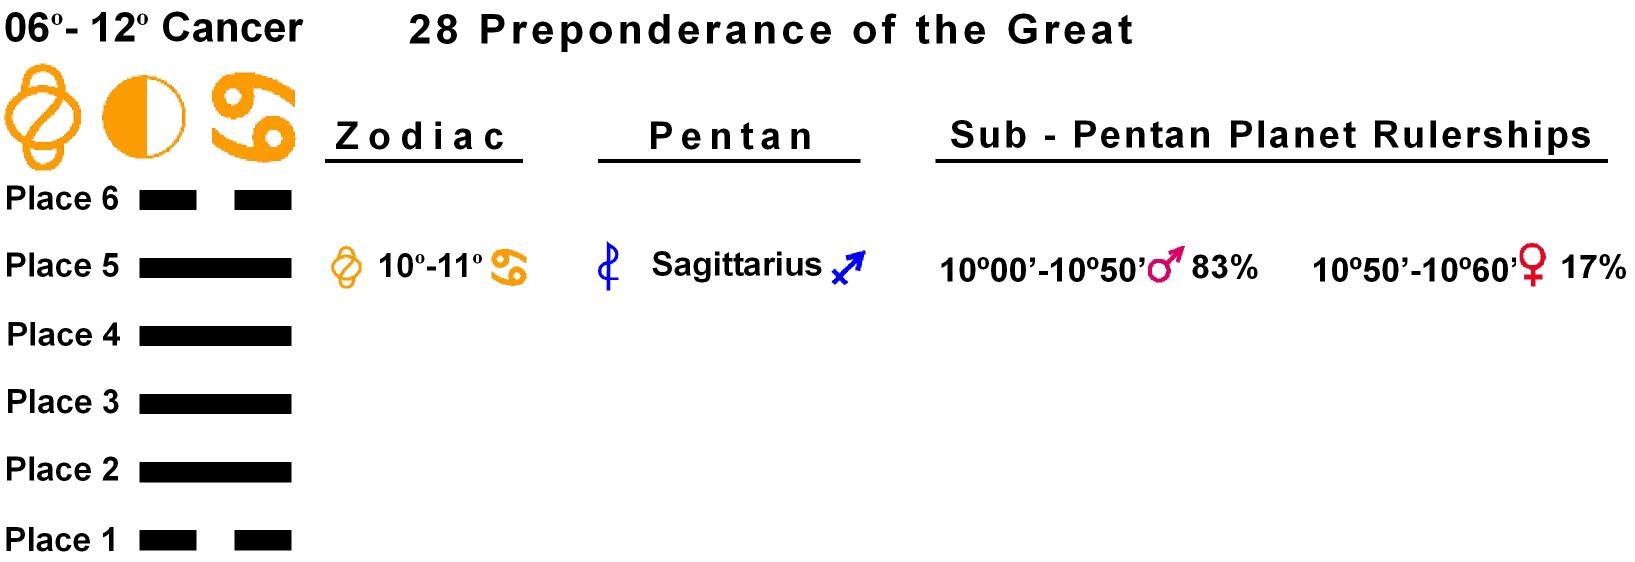 Pent-lines-04CA 10-11 Hx-28 Preponderance Of The Great